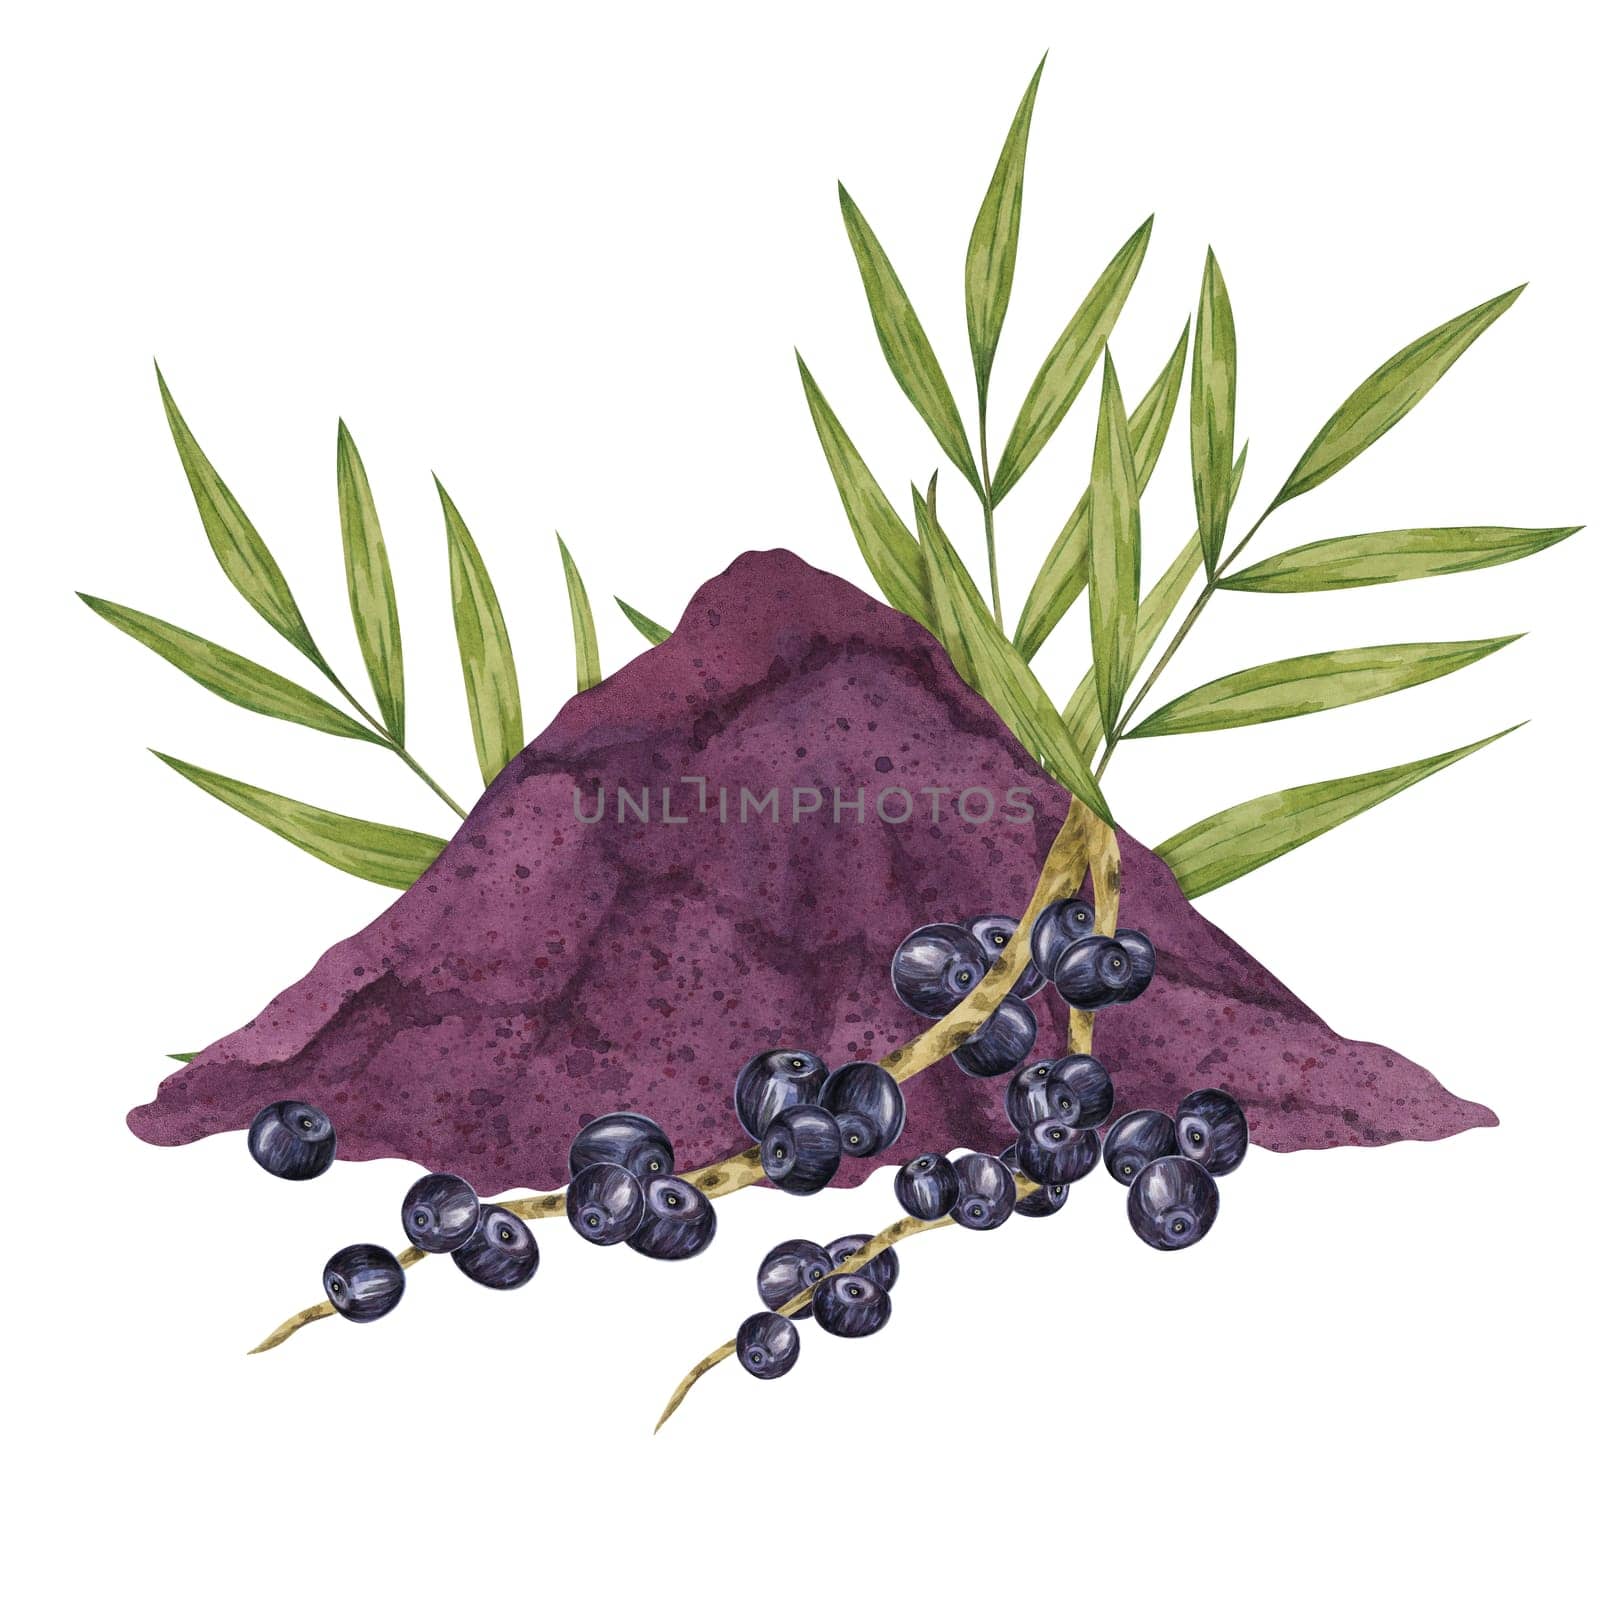 Acai berries fresh, dry powder and palm leaf. Superfood tropical berries. Watercolor illustration for cosmetics, packaging, supplements, labels by Fofito